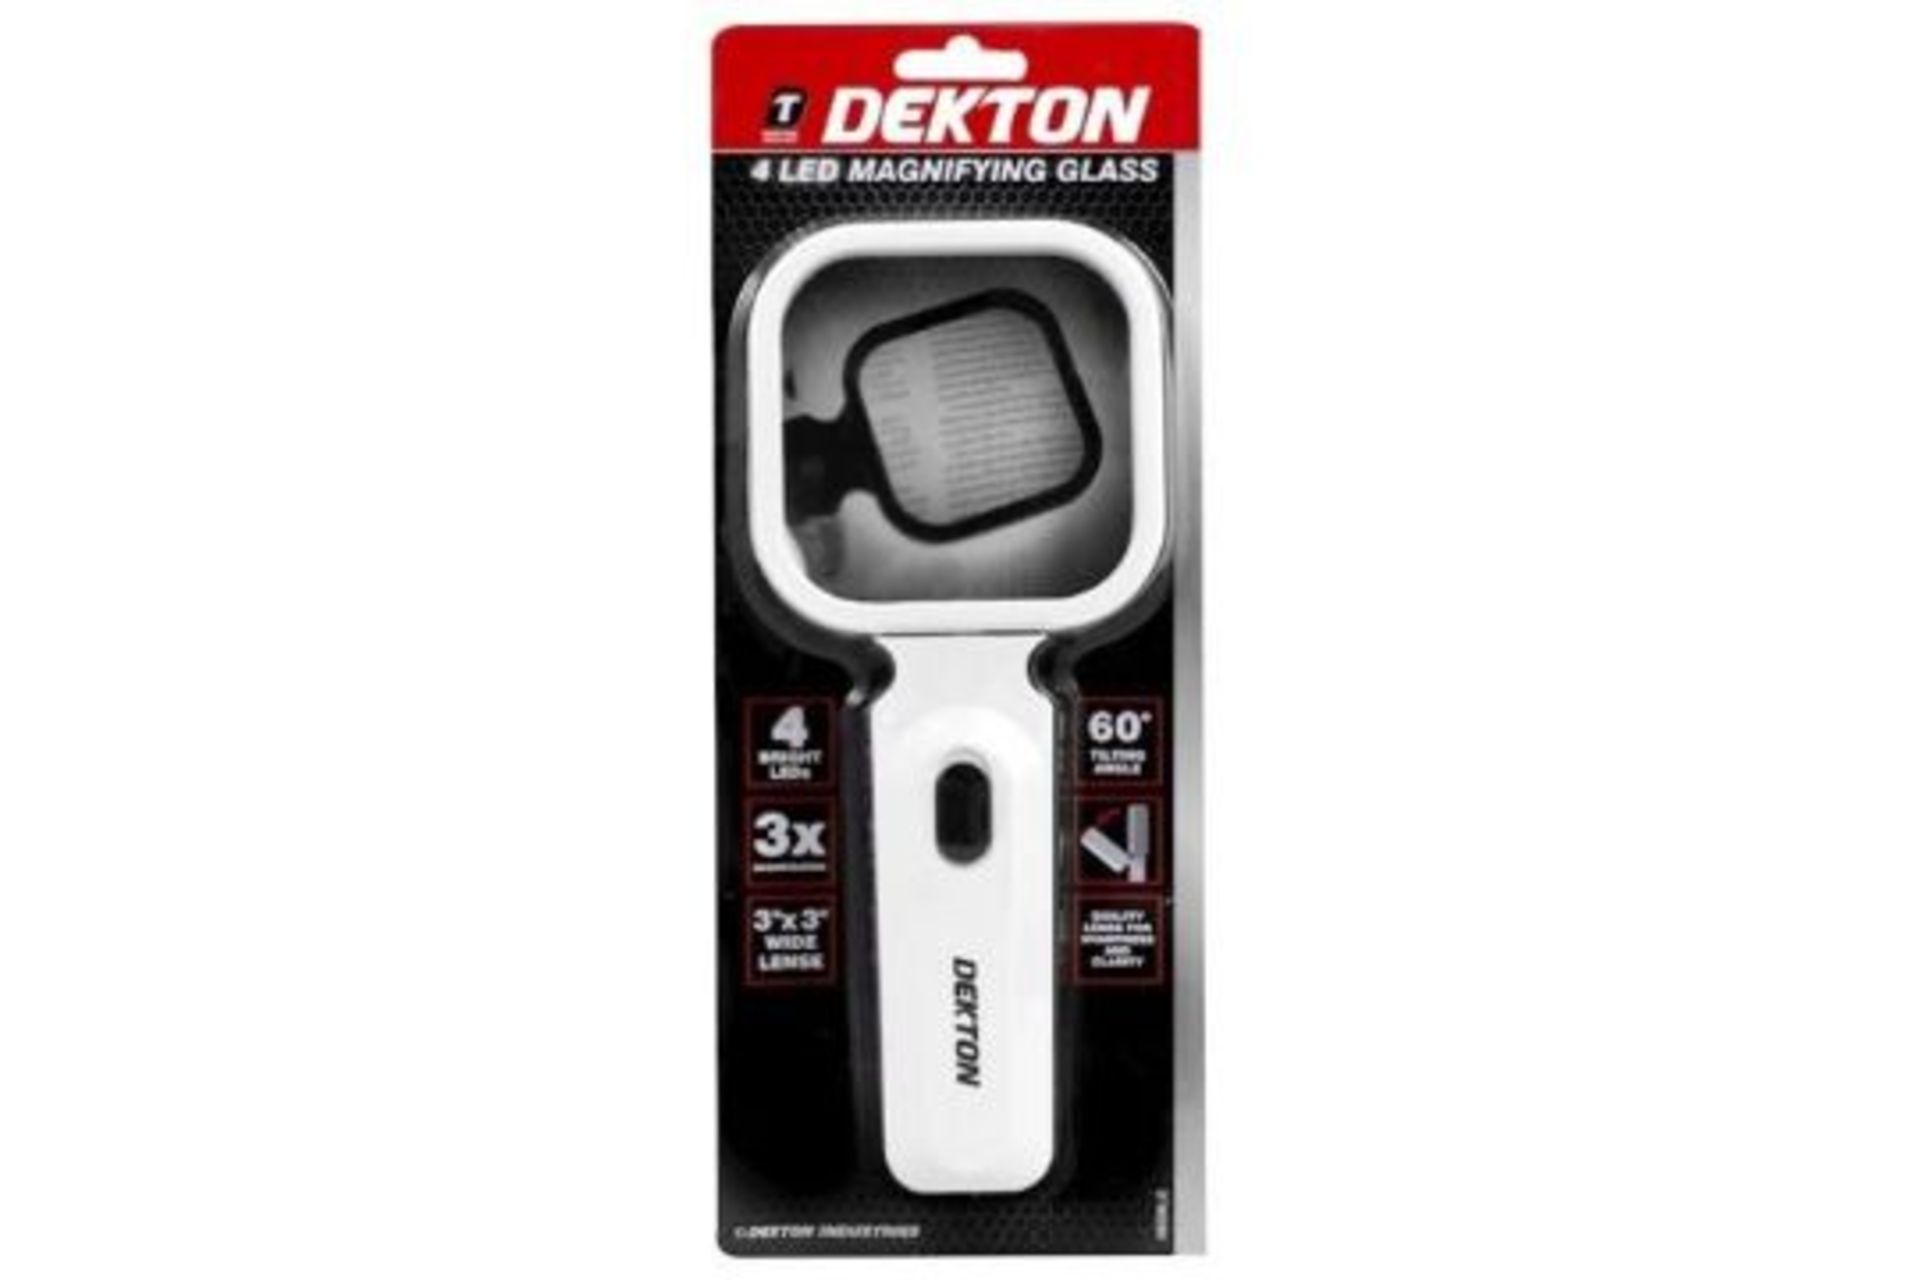 Dekton 4 Led Magnifying Glass 3" x 3" Wide Lens With 3 X Magnification